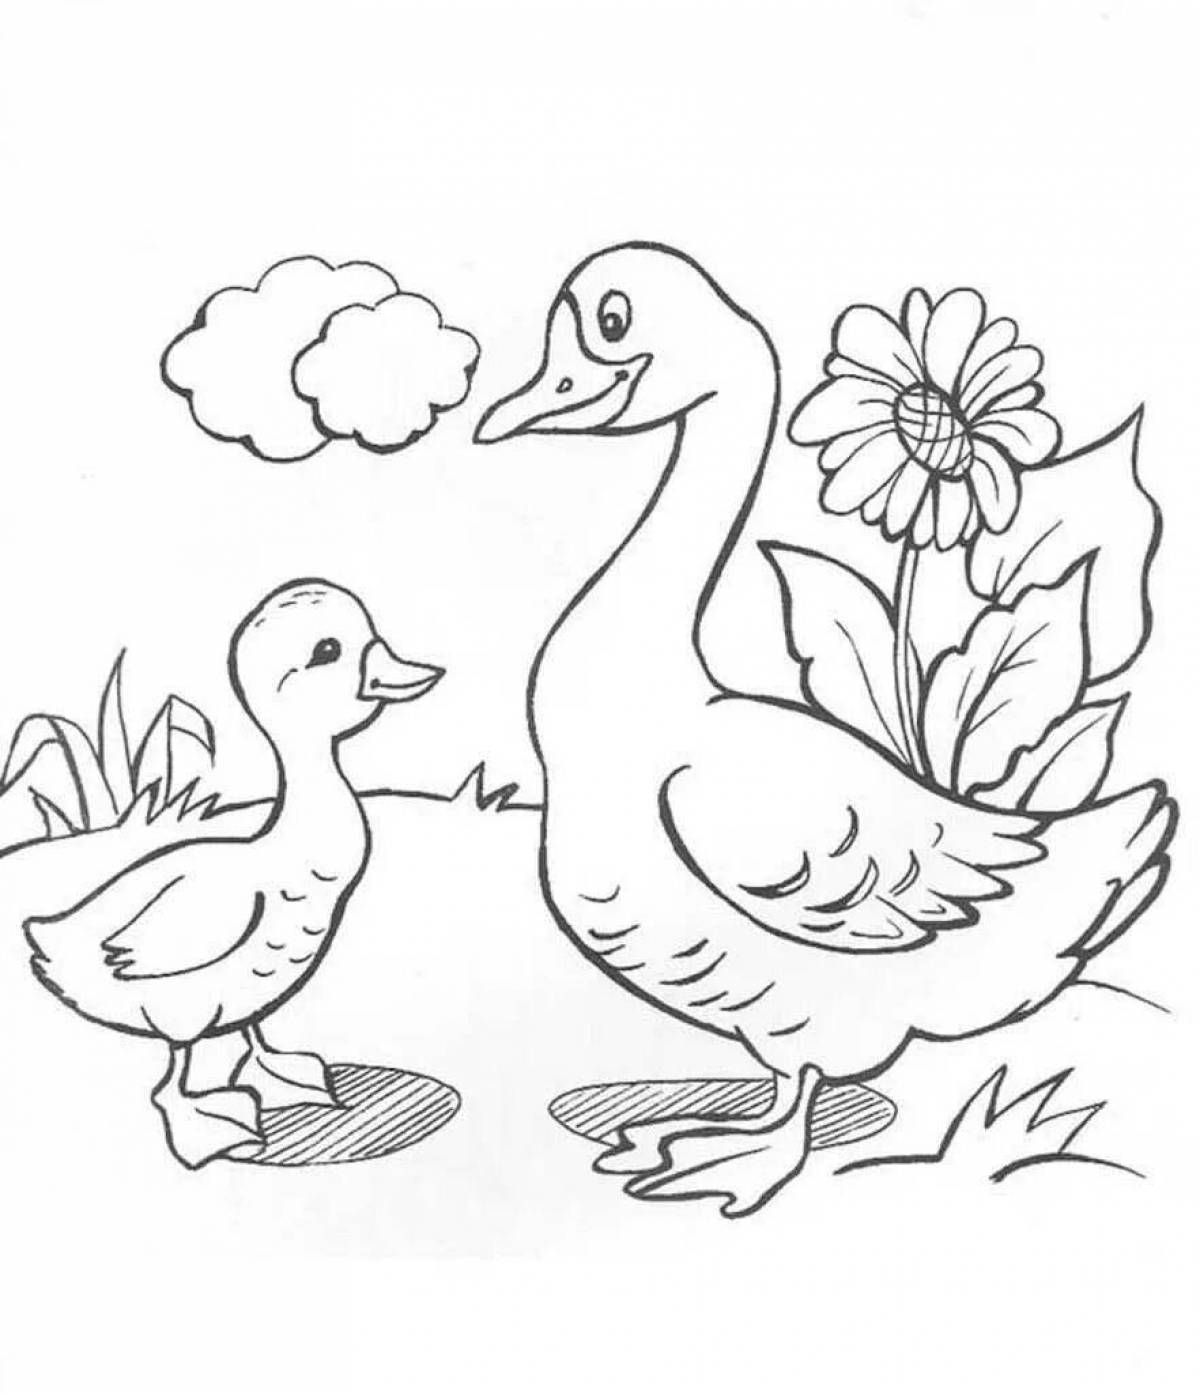 Coloring book bold poultry